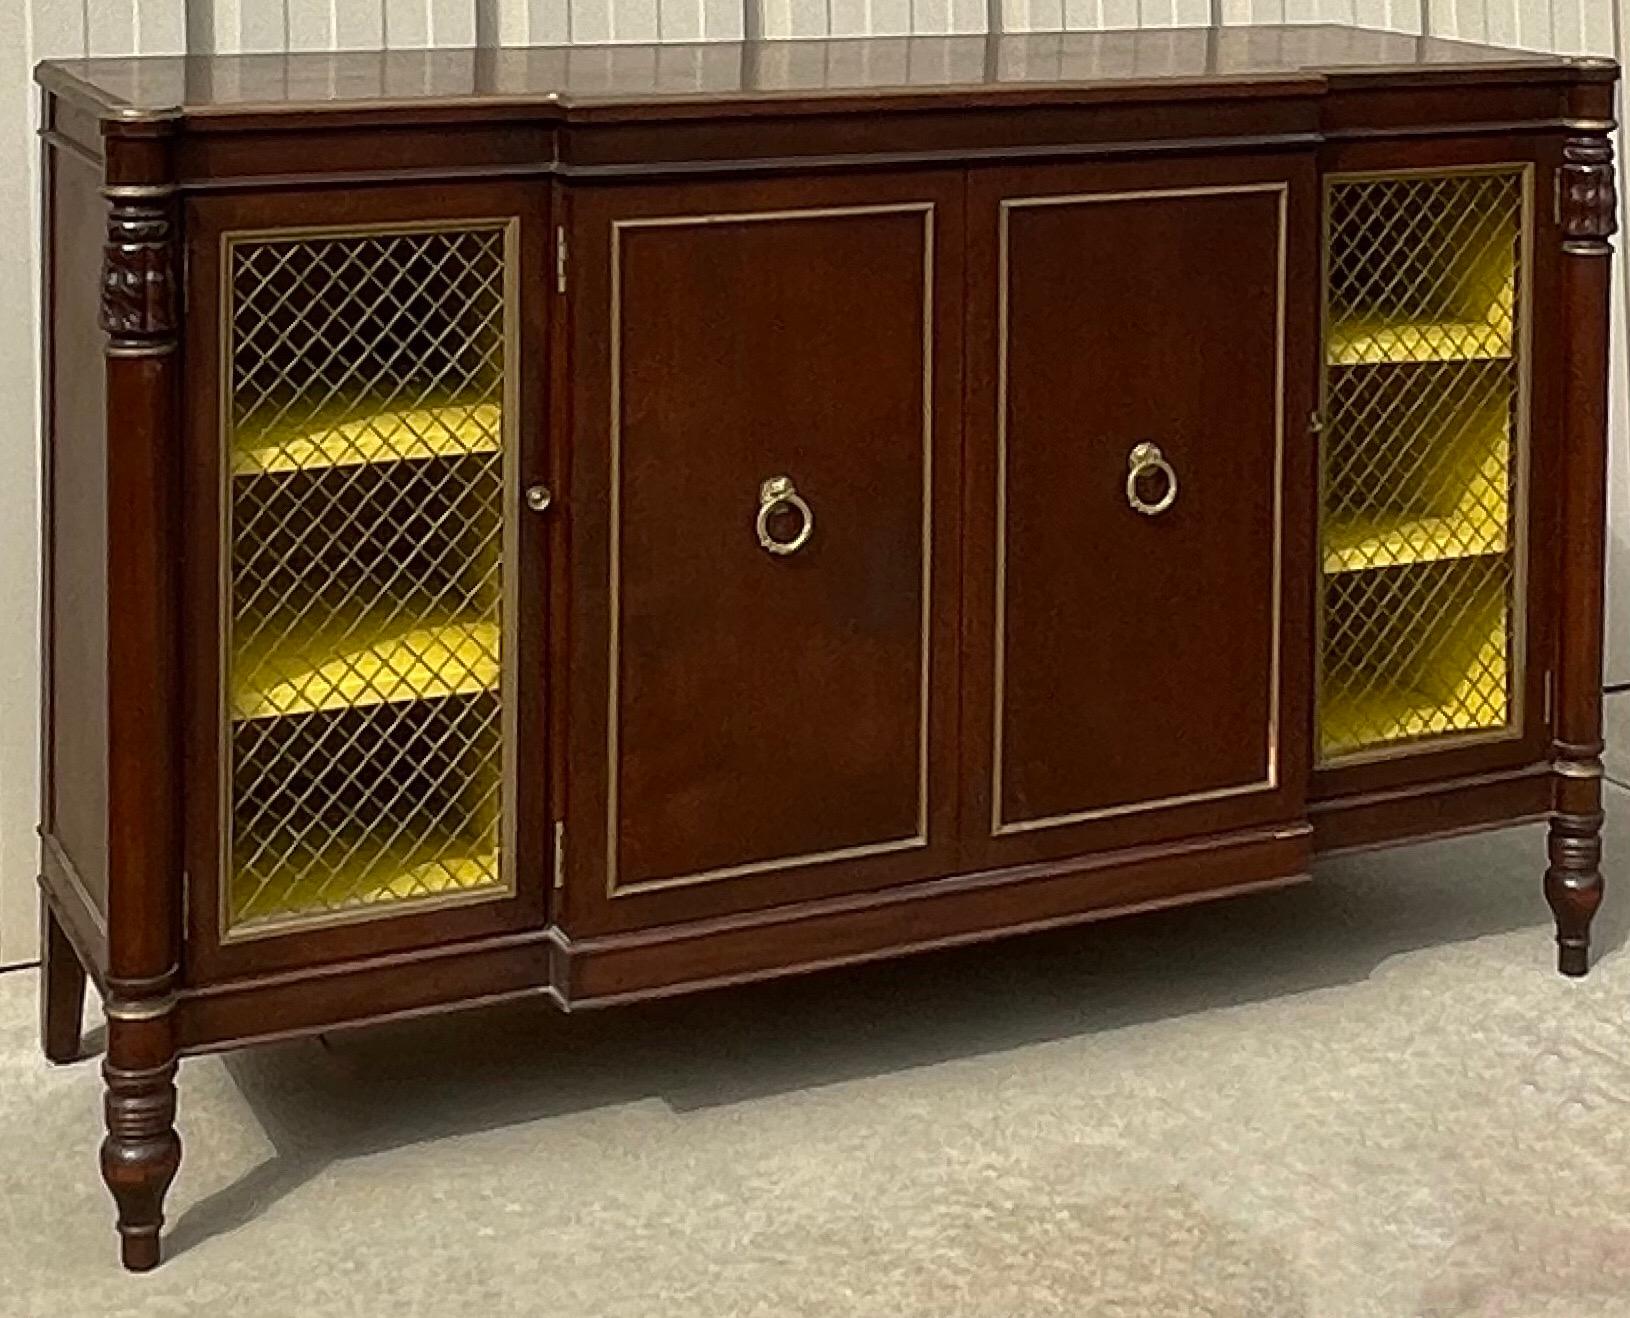 This is a lovely cabinet! It has Regency styling with a yellow painted interior. The doors have wire fronts that allow the interior to shine. It has interior shelves and drawer. It is unmarked and in very good condition.